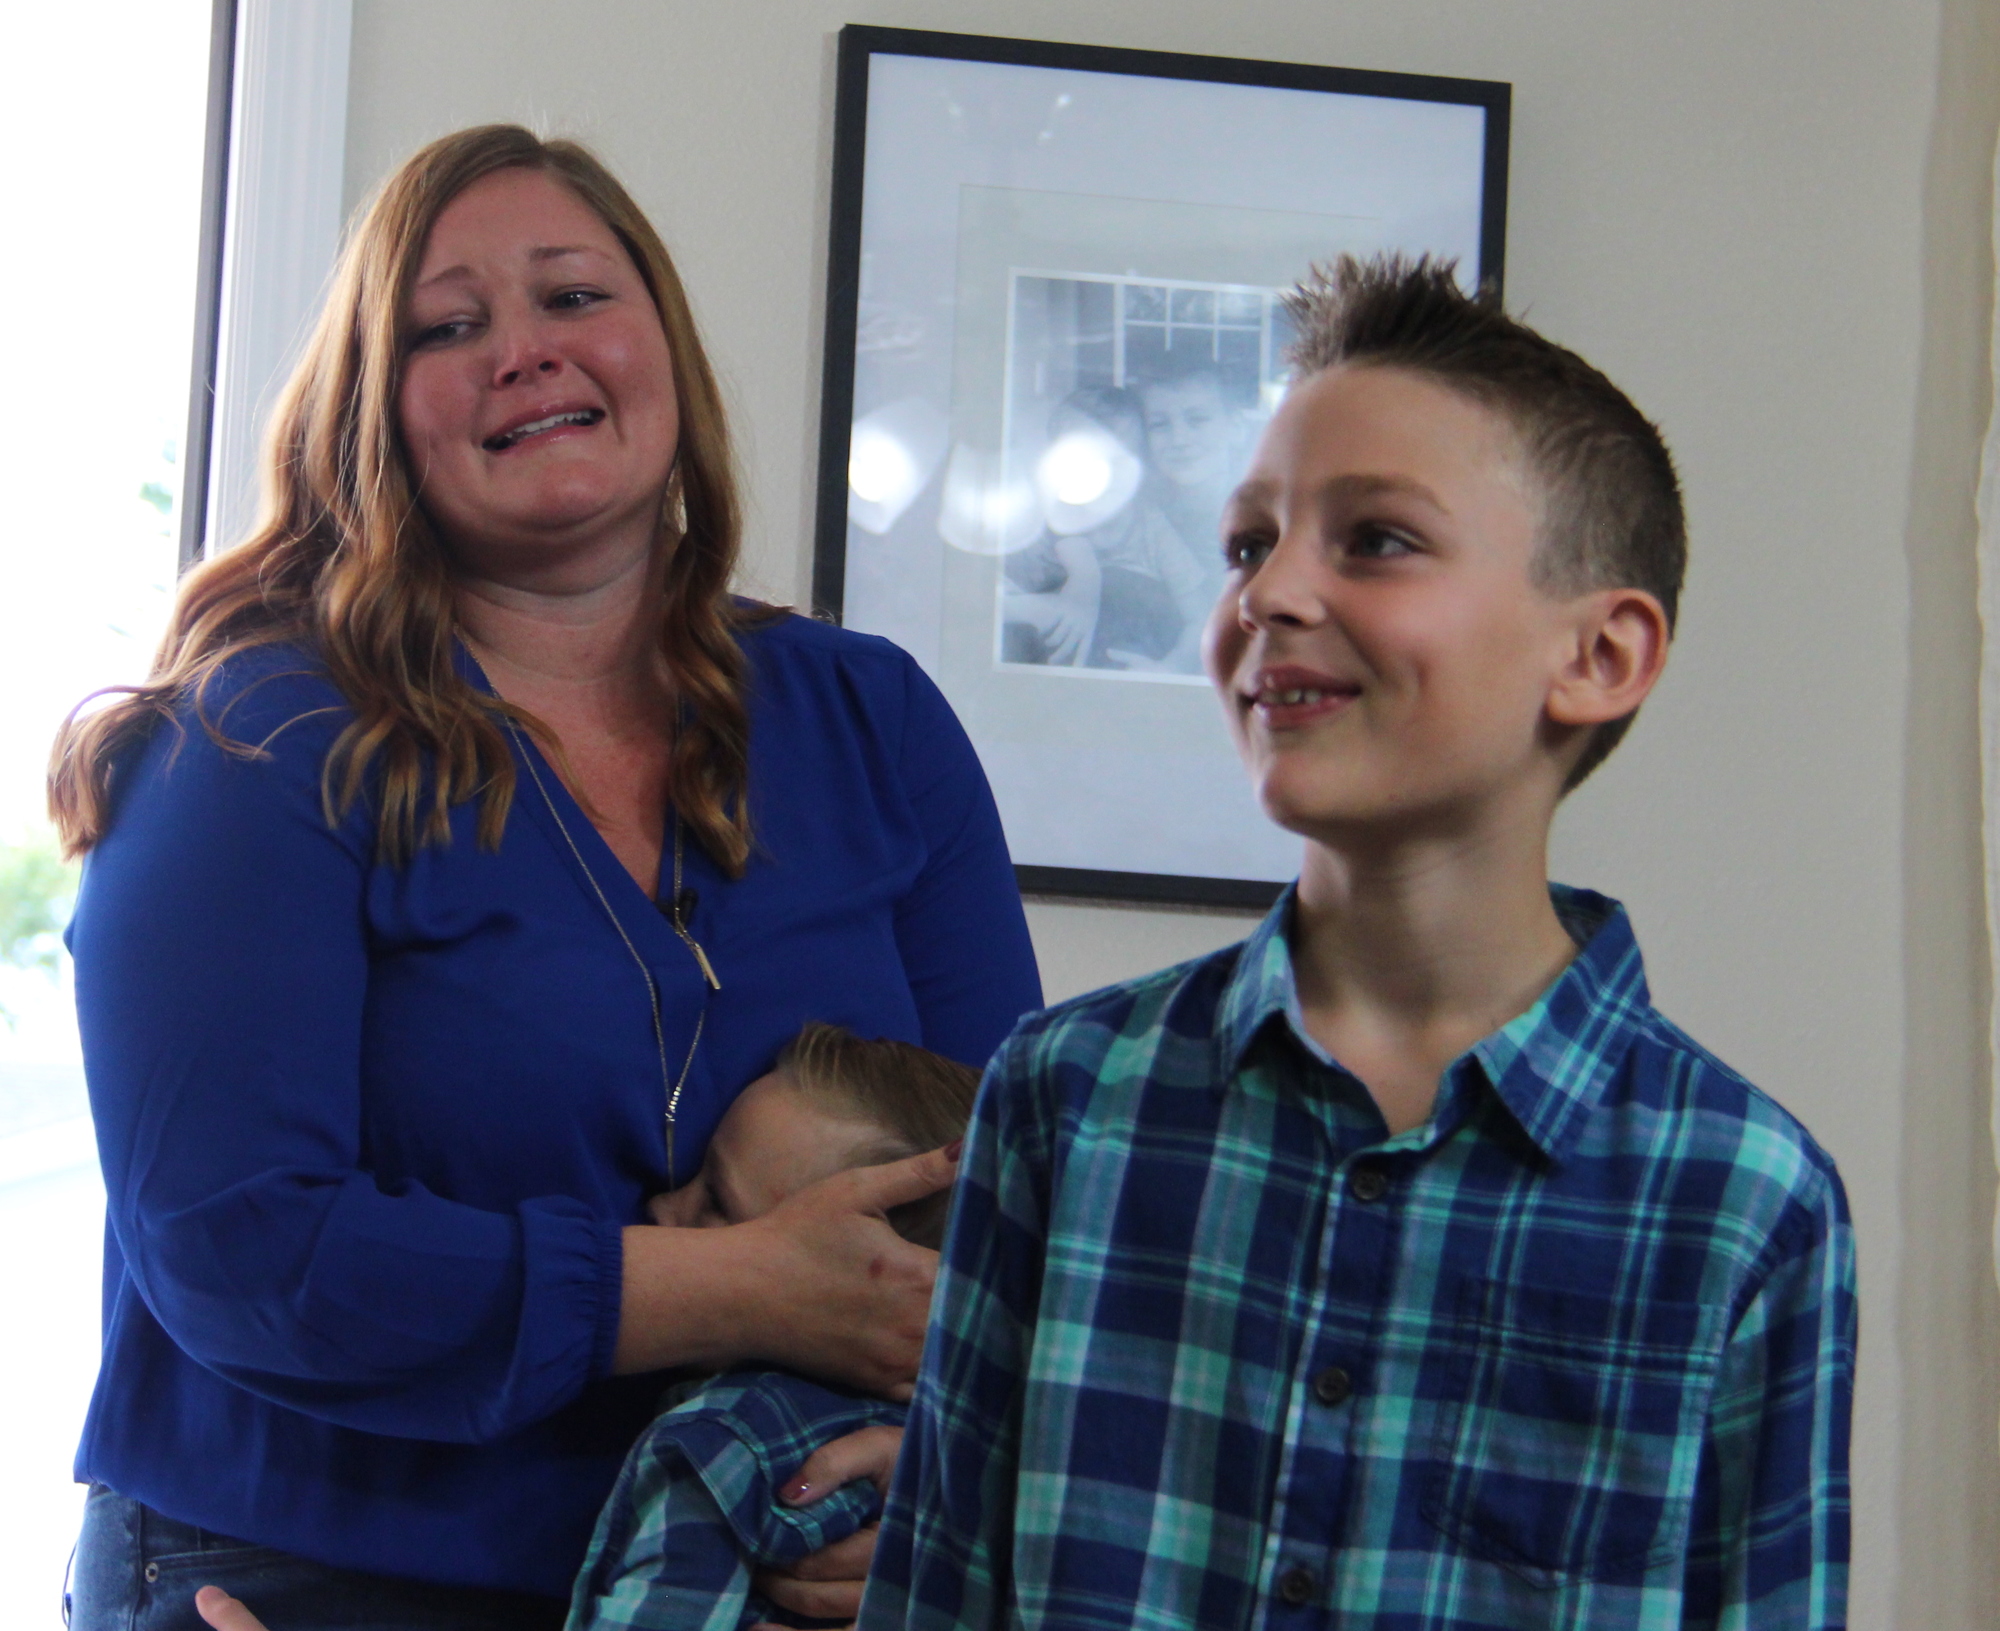 Chelsie Lloyd shed tears of joy and held her son, Aiden, when she saw her rebuilt and refurbished home for the first time. 